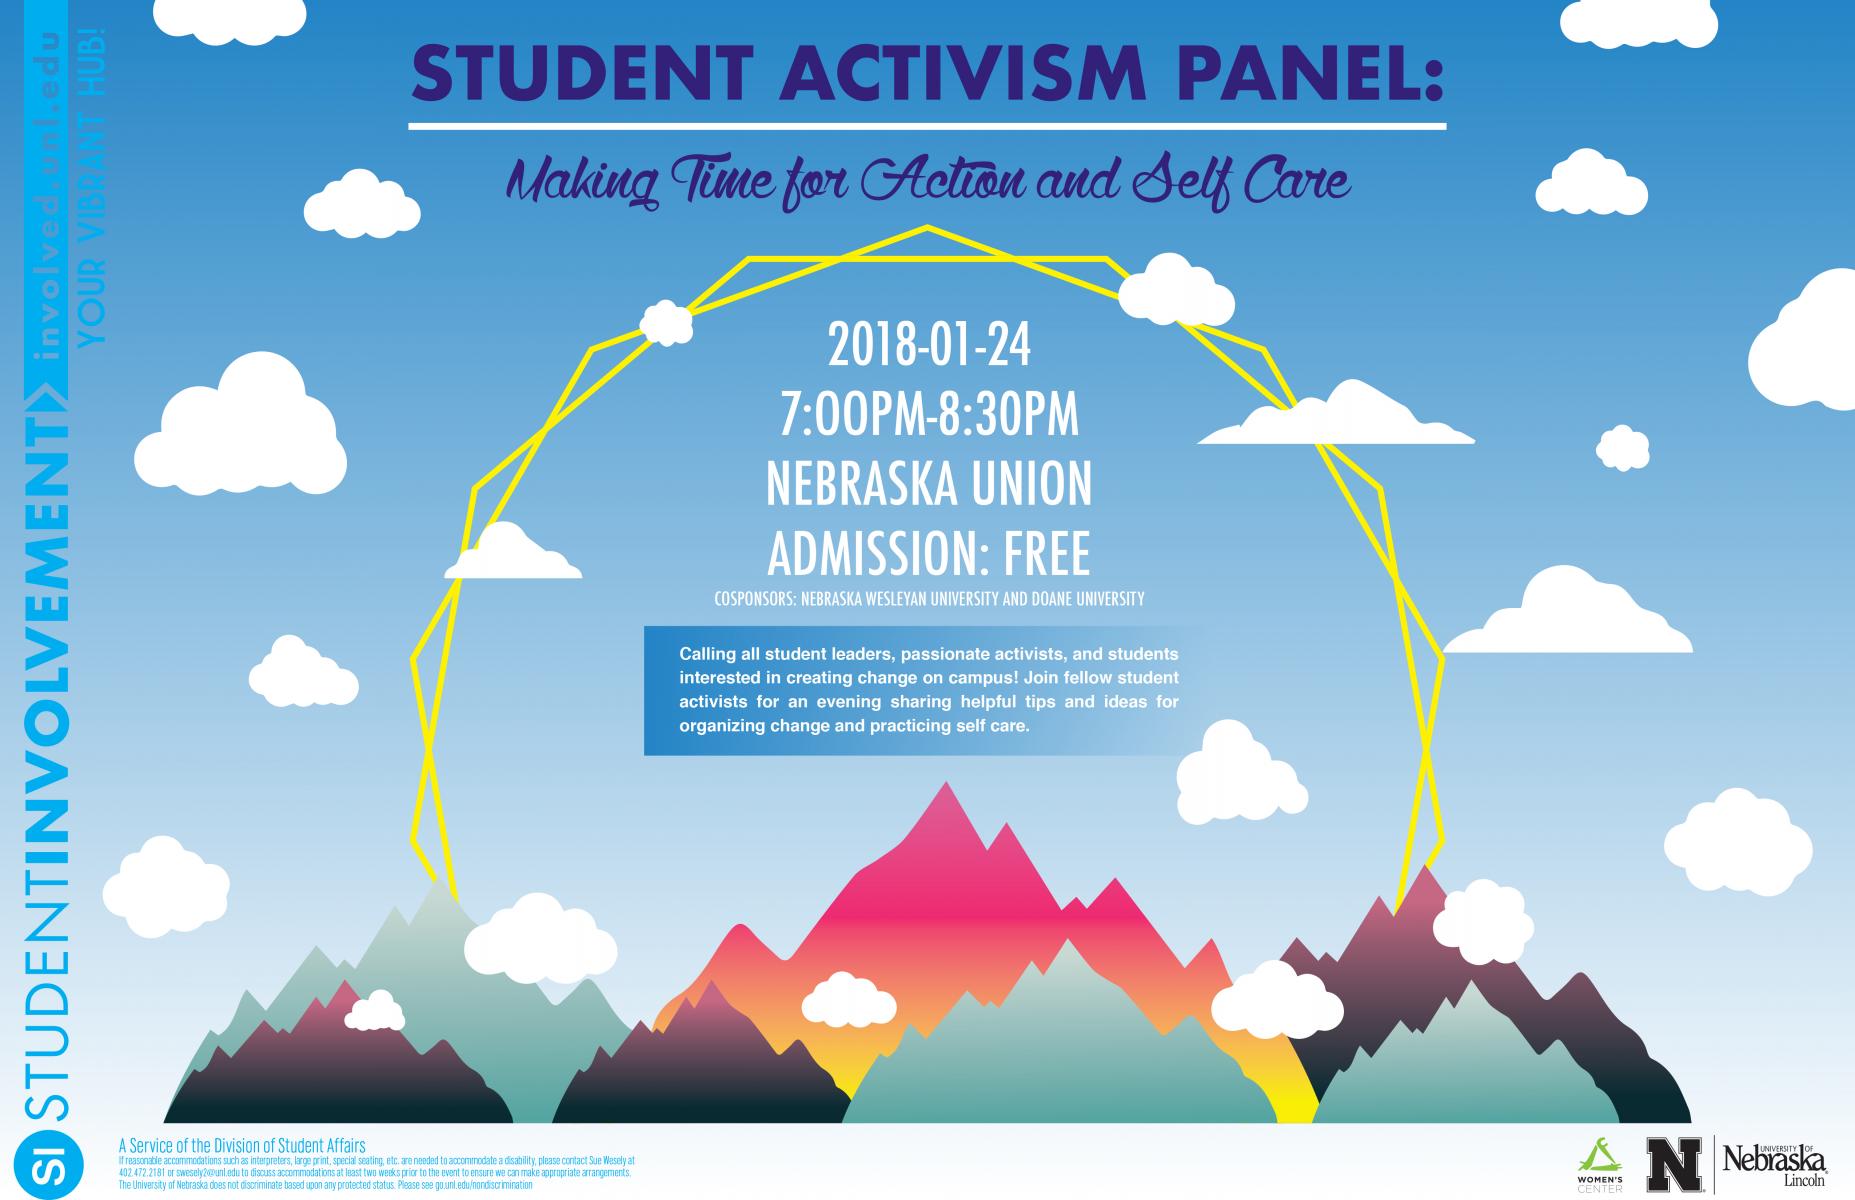 Student Activism Panle: Making Tim for Activism and Self Care